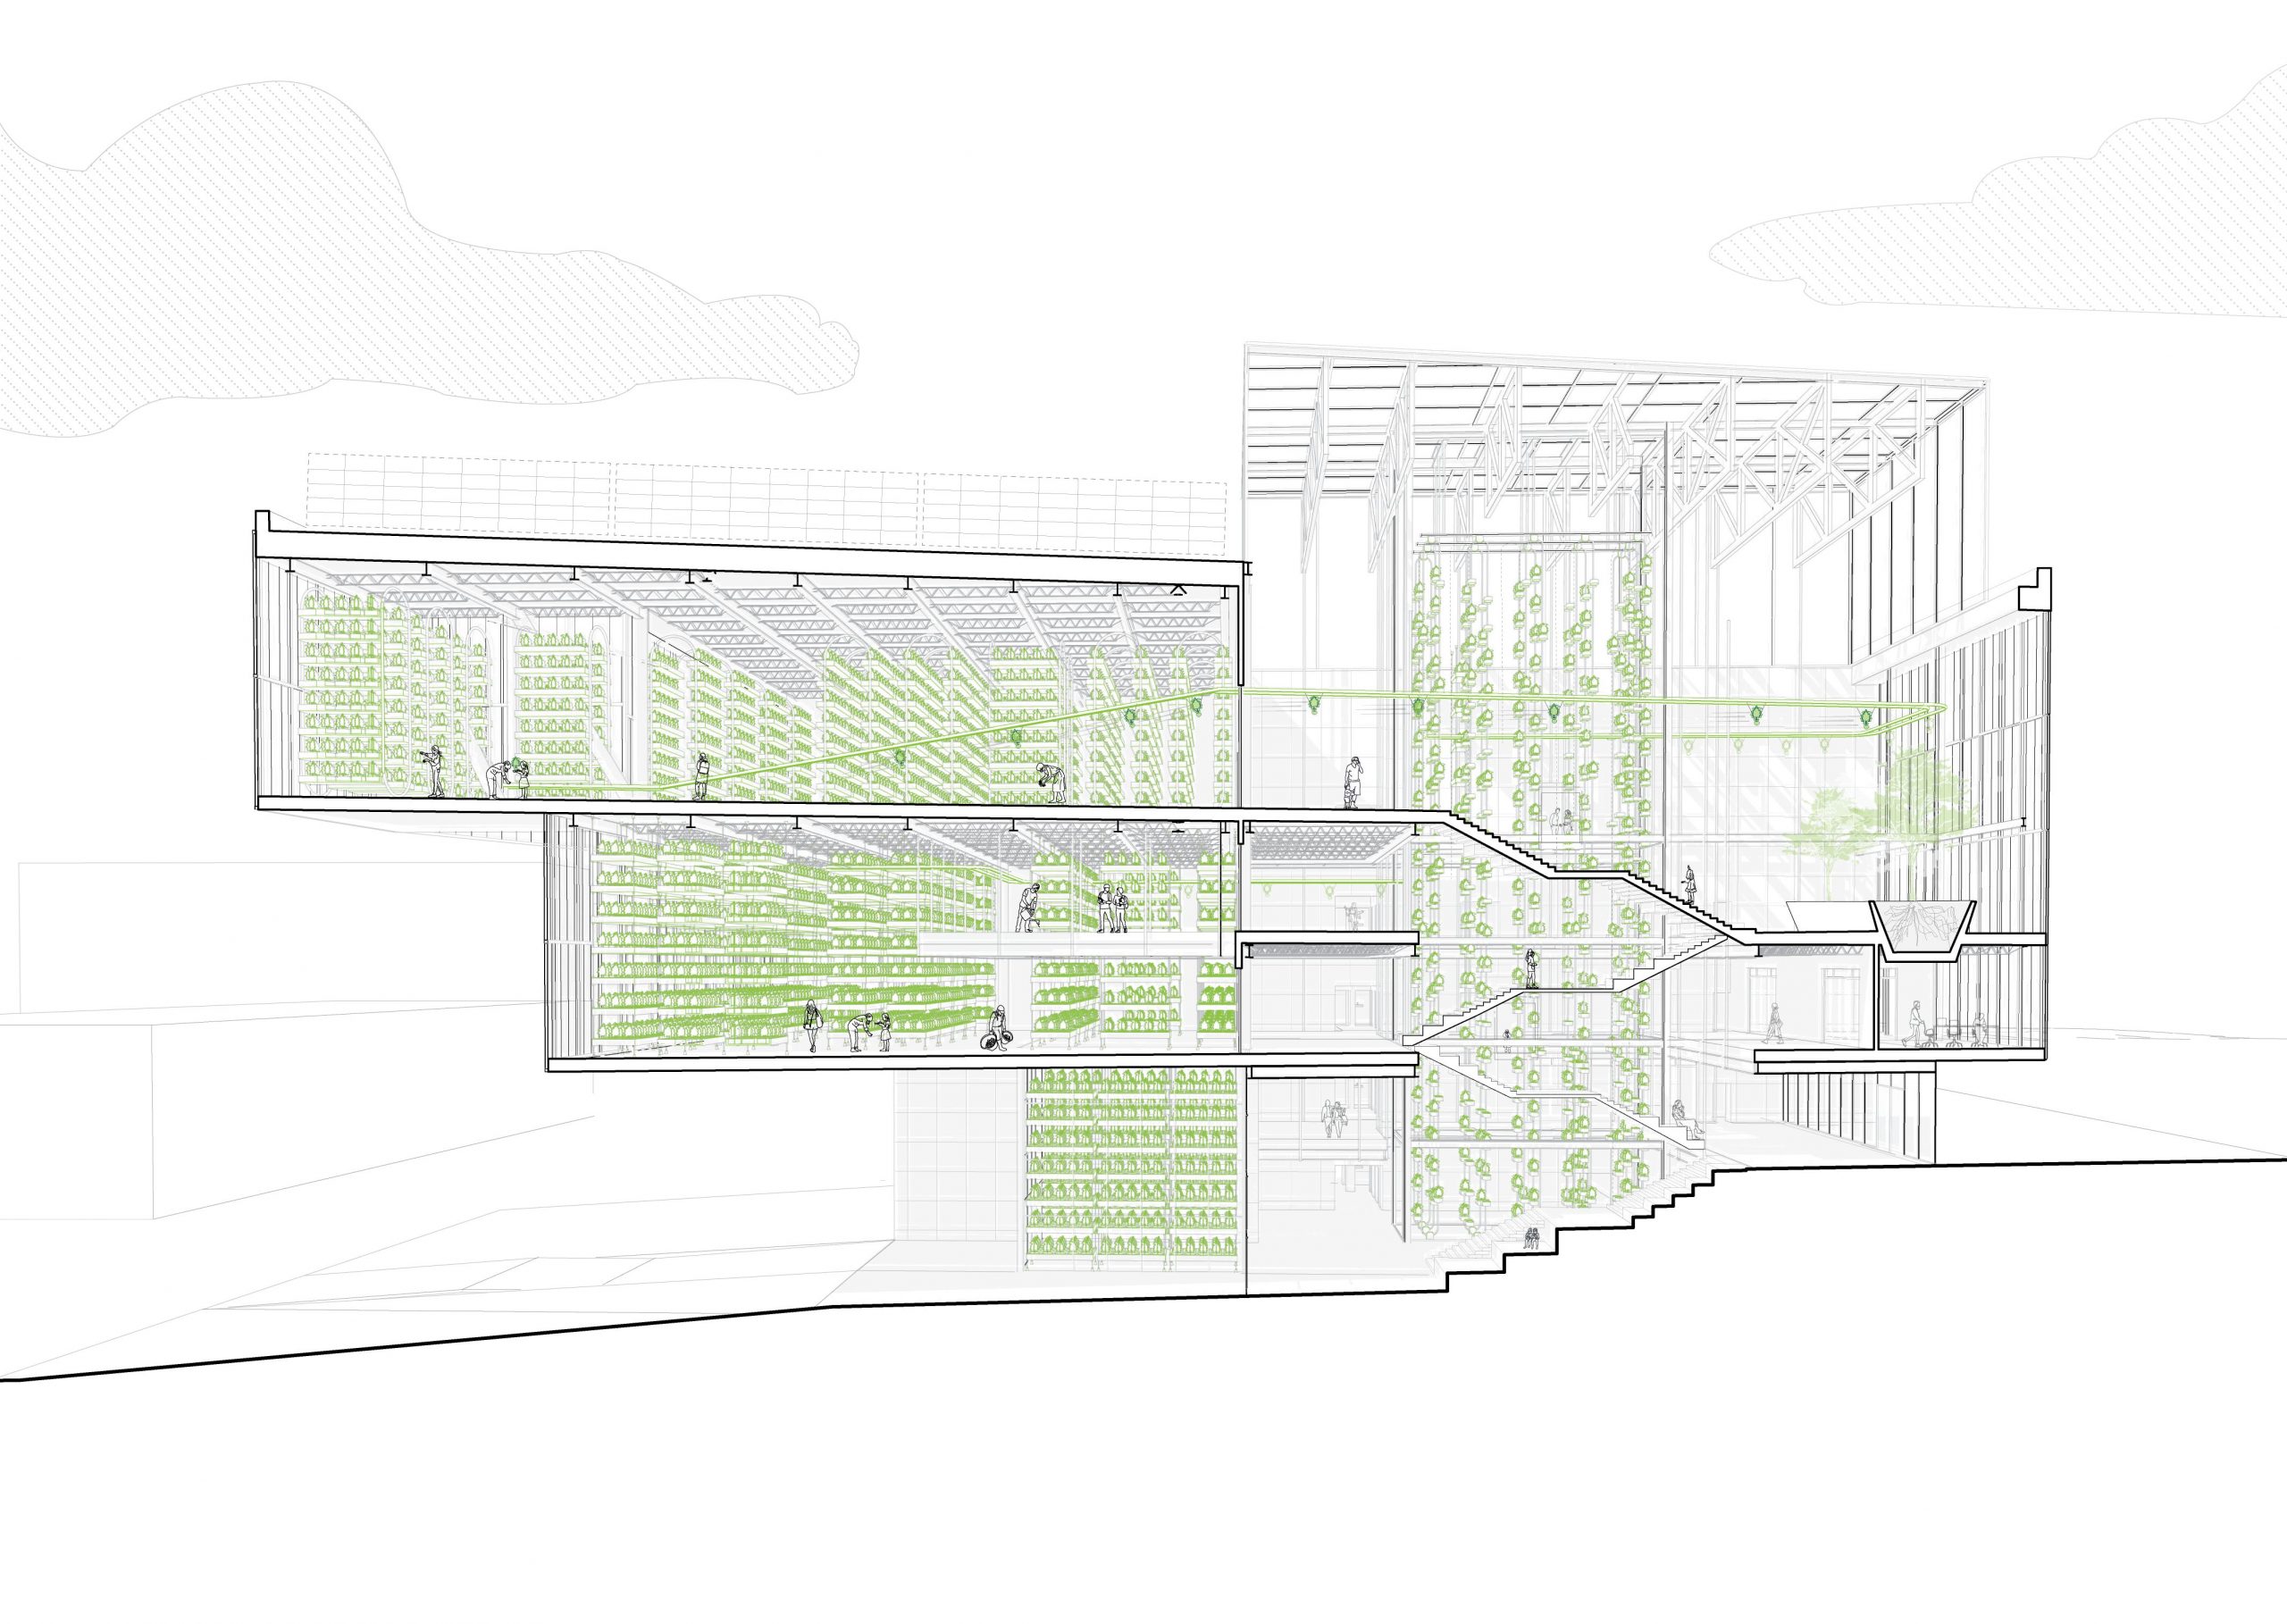 Sectional architectural drawing with indoor greenery and structural details